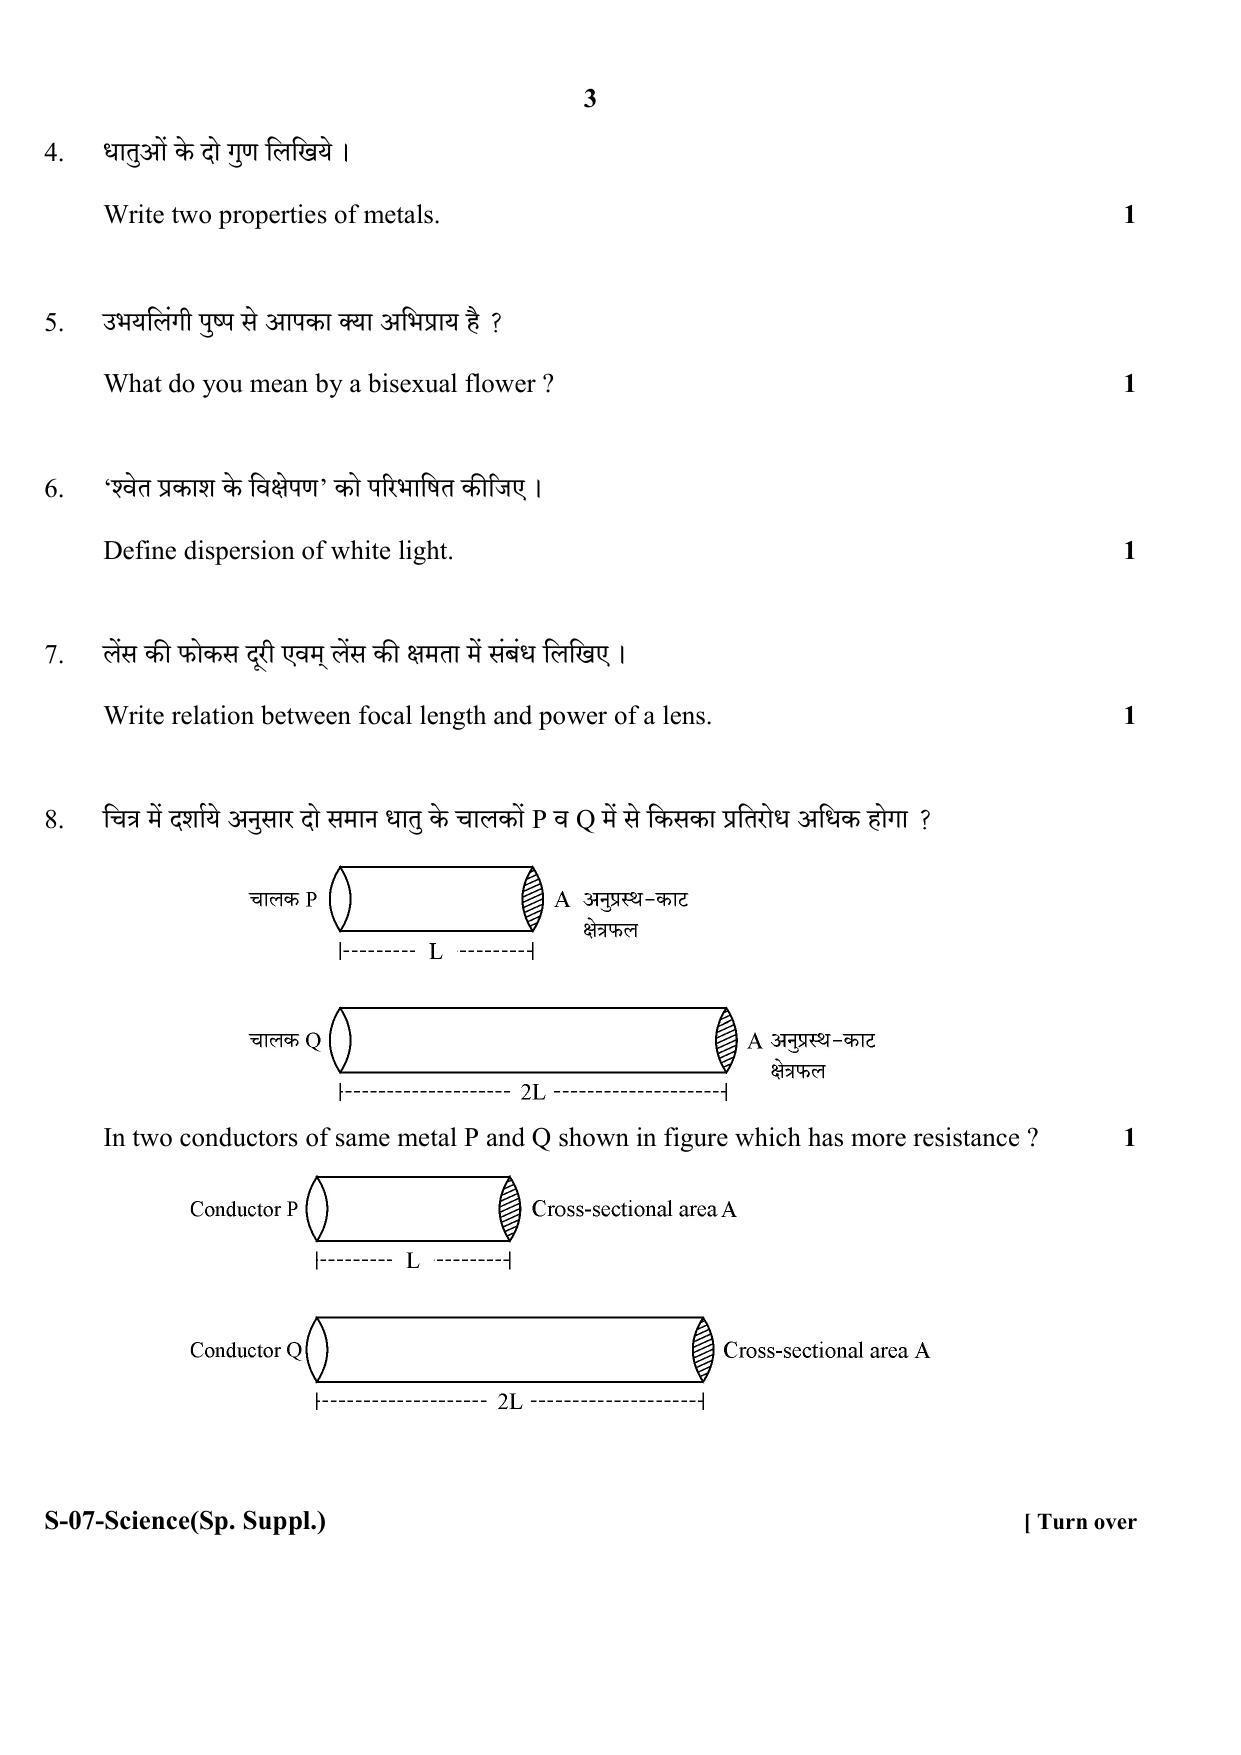 RBSE Class 10 Science ( supplementary) 2017 Question Paper - Page 3